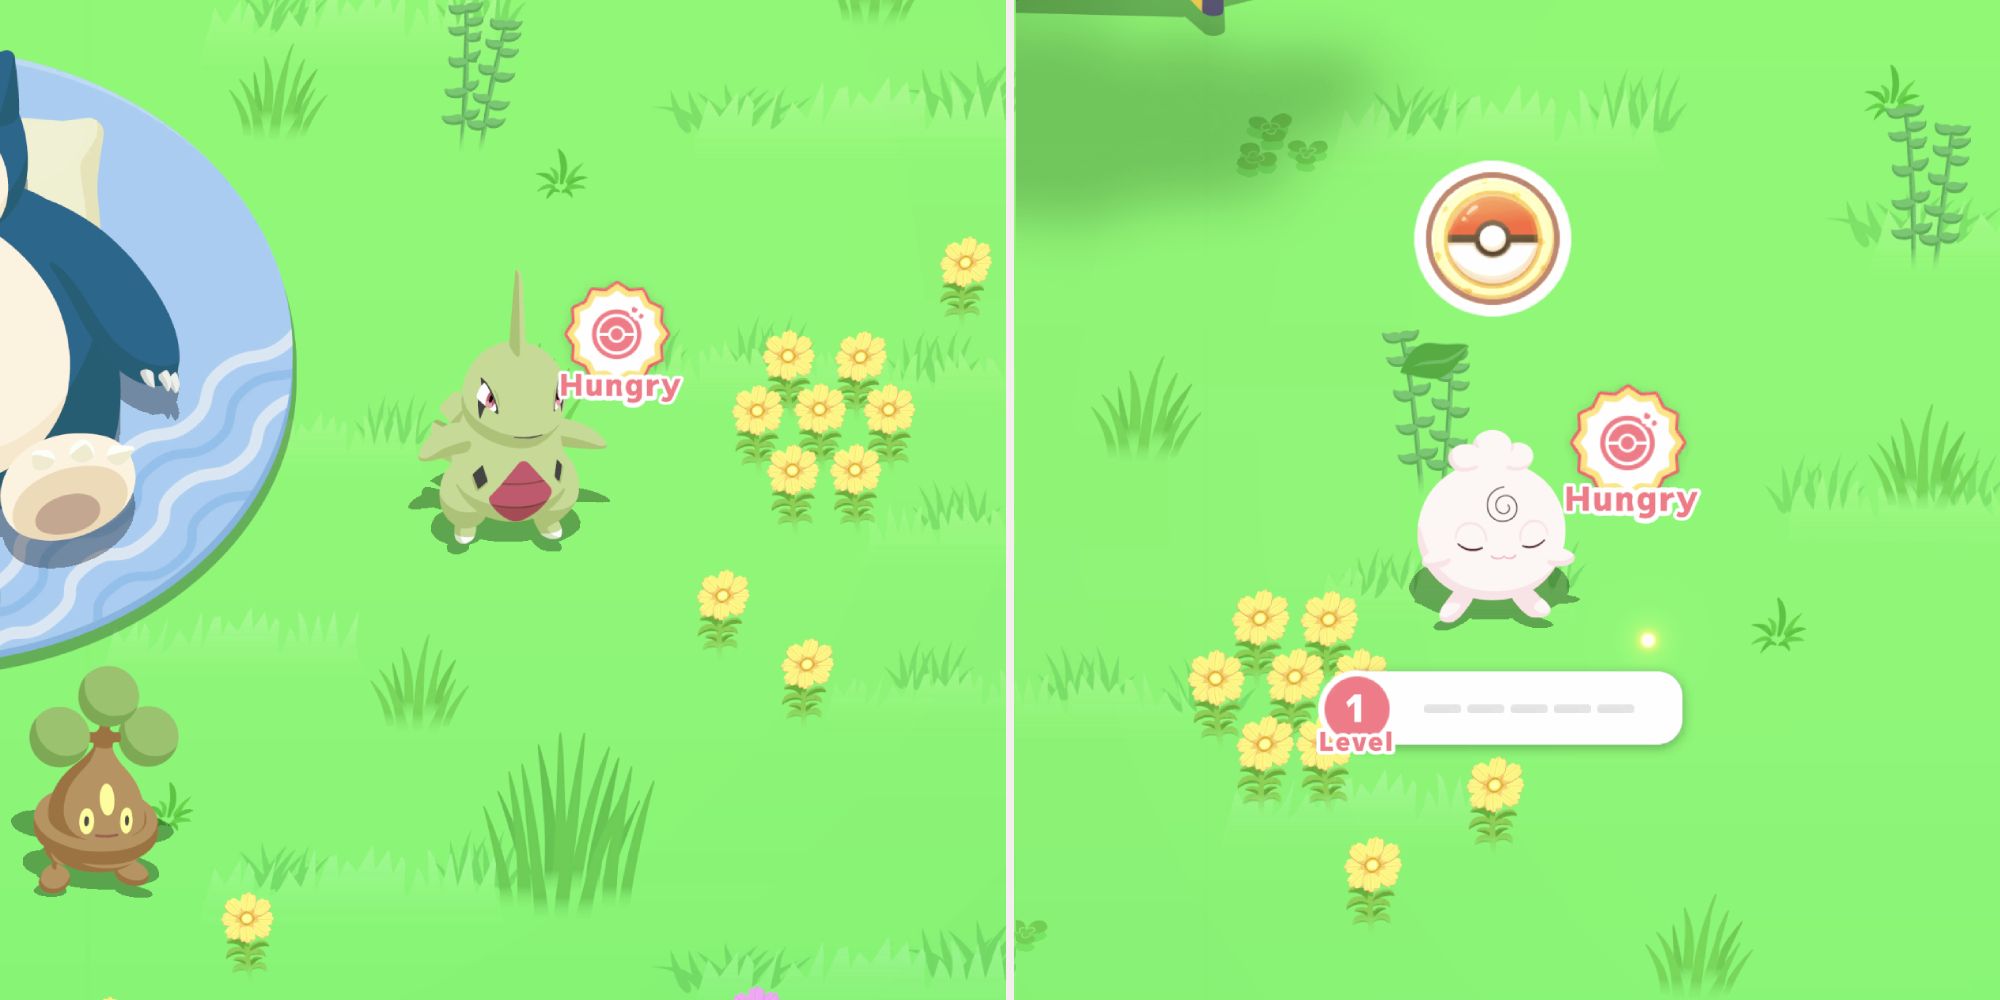 Pokemon Sleep reveals sleep-related facts about Ditto, Doduo, and others